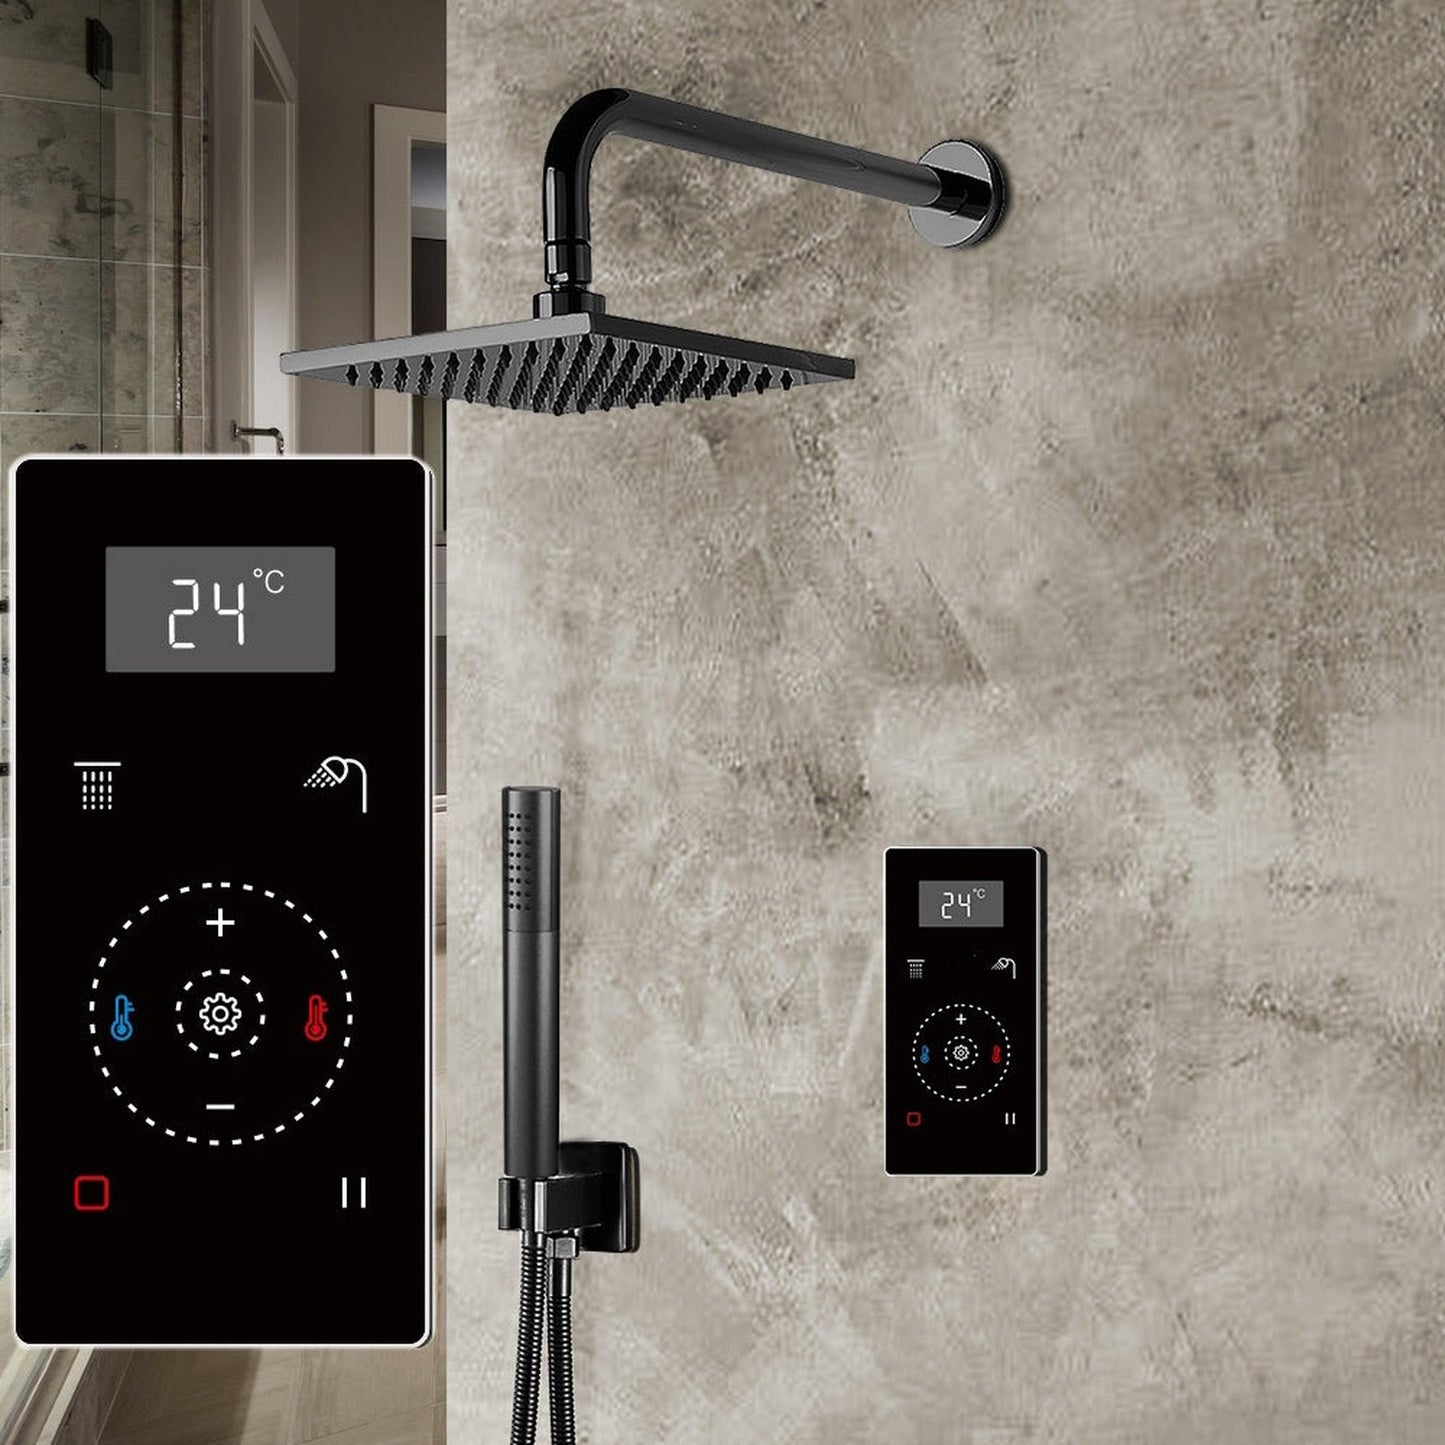 Fontana 8" Matte Black Square Wall-Mounted Automatic Thermostatic Shower With Black Digital Touch Screen Shower Mixer Display 2-Function Rainfall Shower Set With Hand Shower